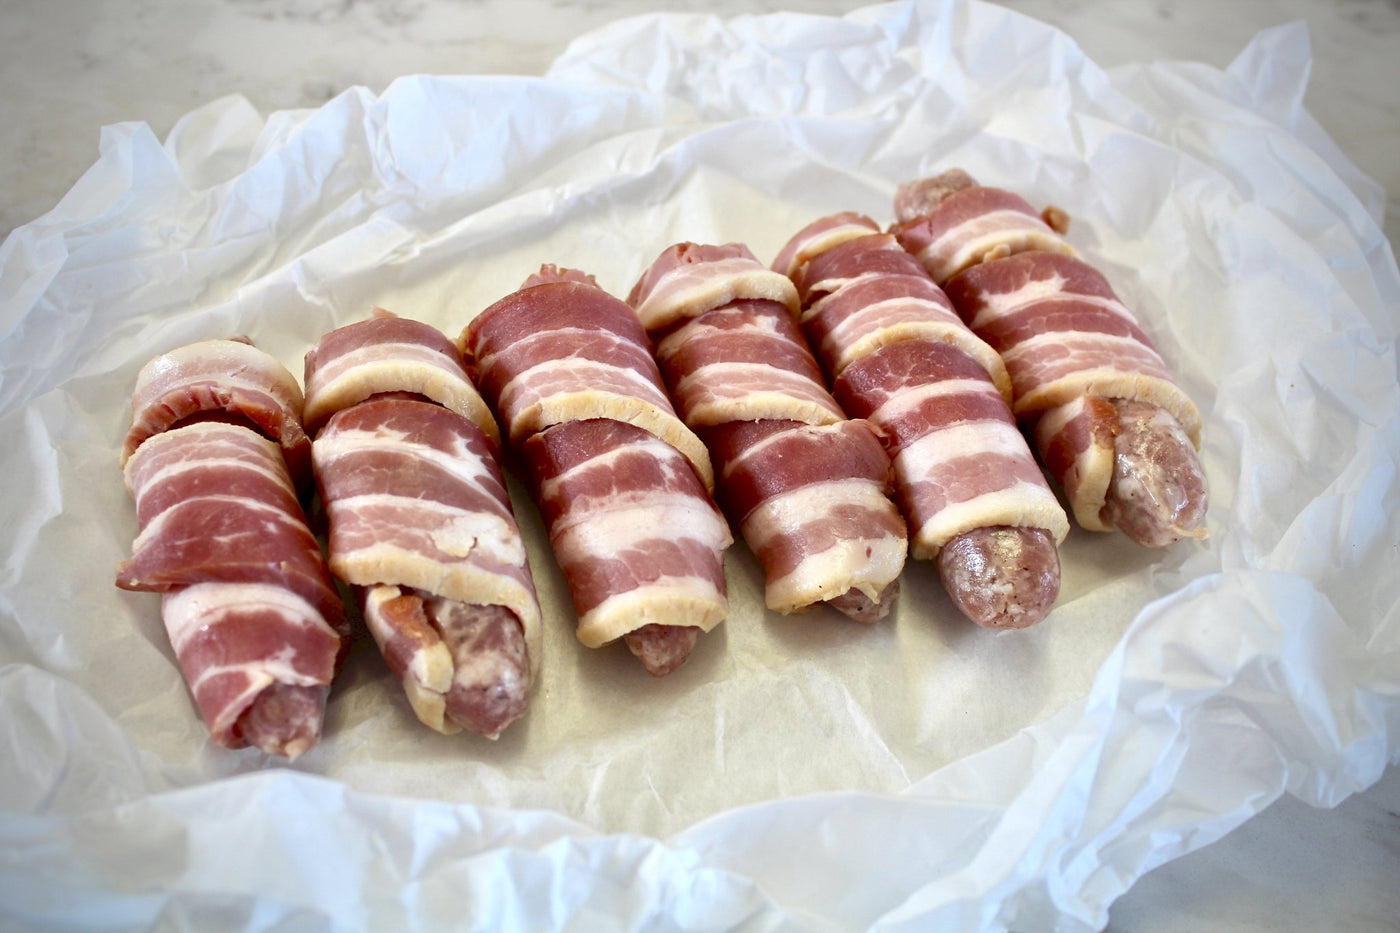 Xmas Special Pigs In Blankets - Thomas Joseph Butchery - Ethical Dry-Aged Meat The Best Steak UK Thomas Joseph Butchery